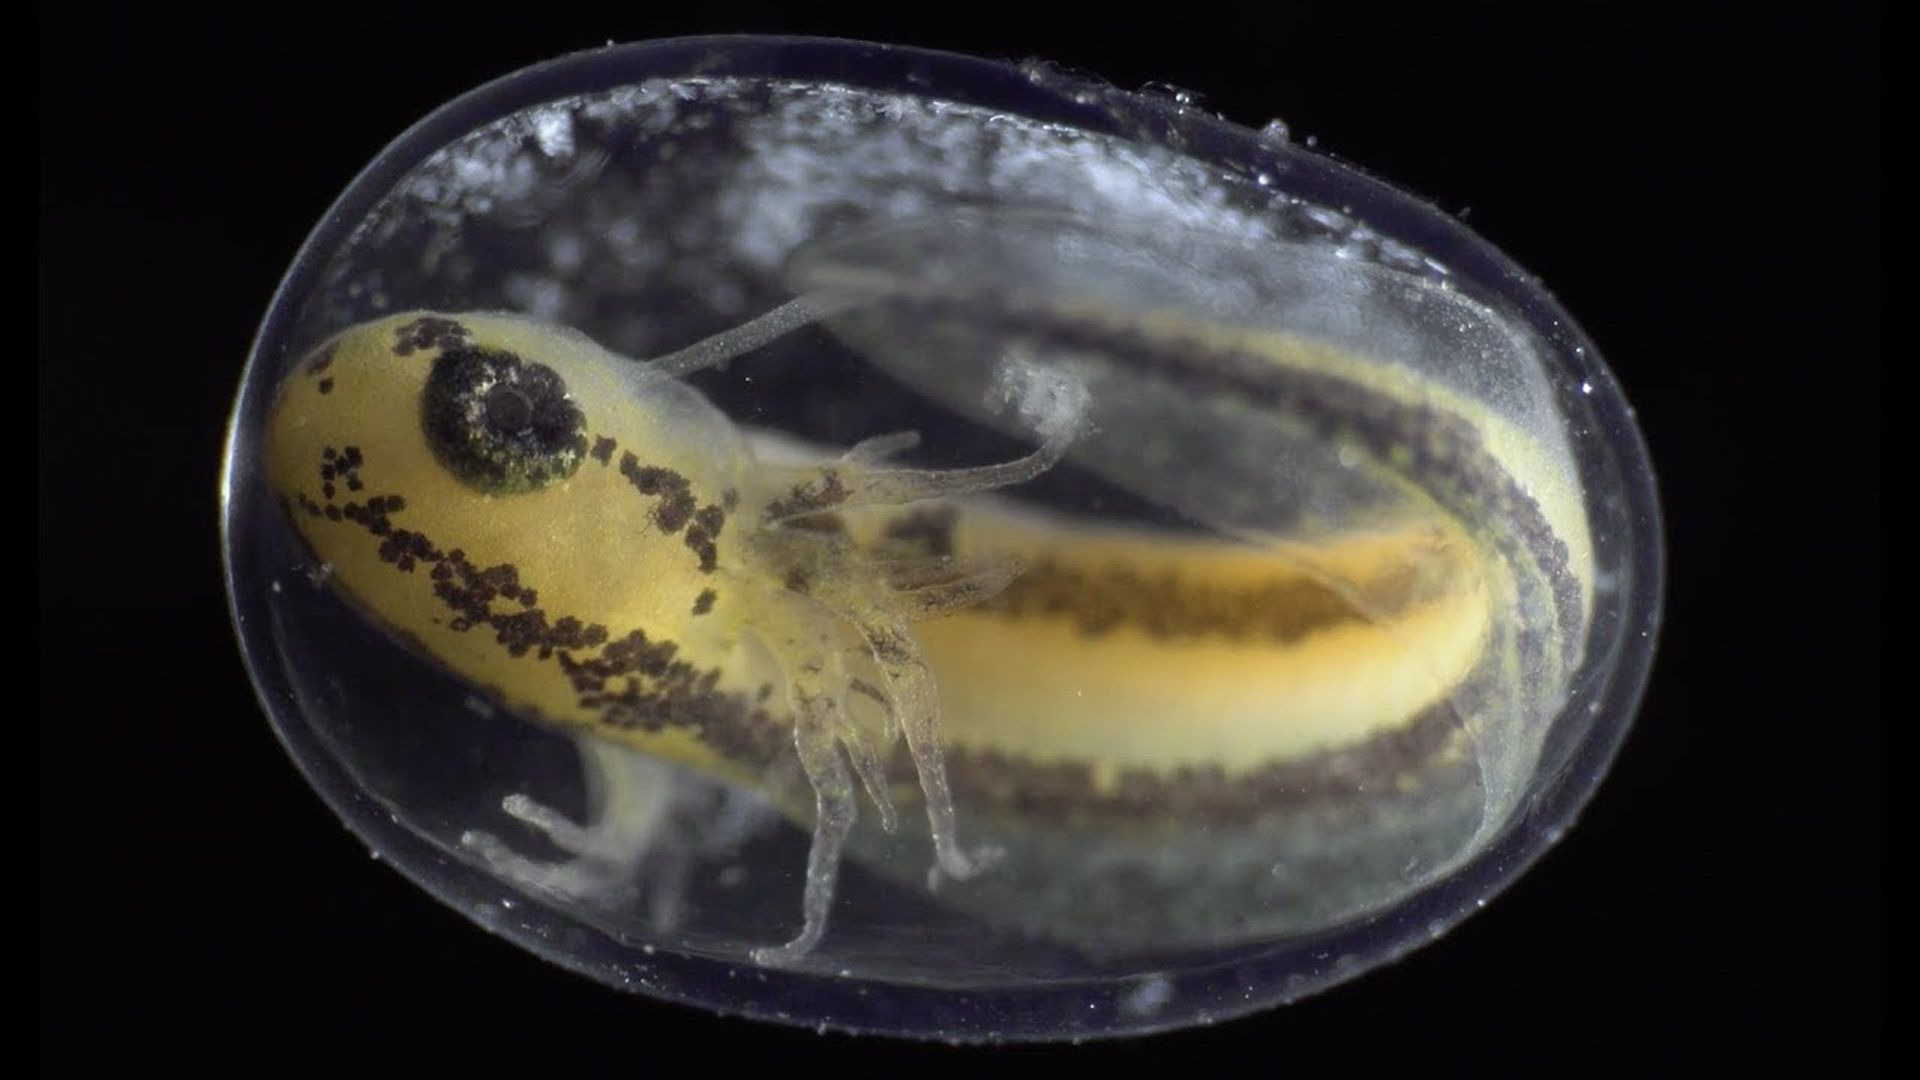 A tadpole in a transparent sac on a black background